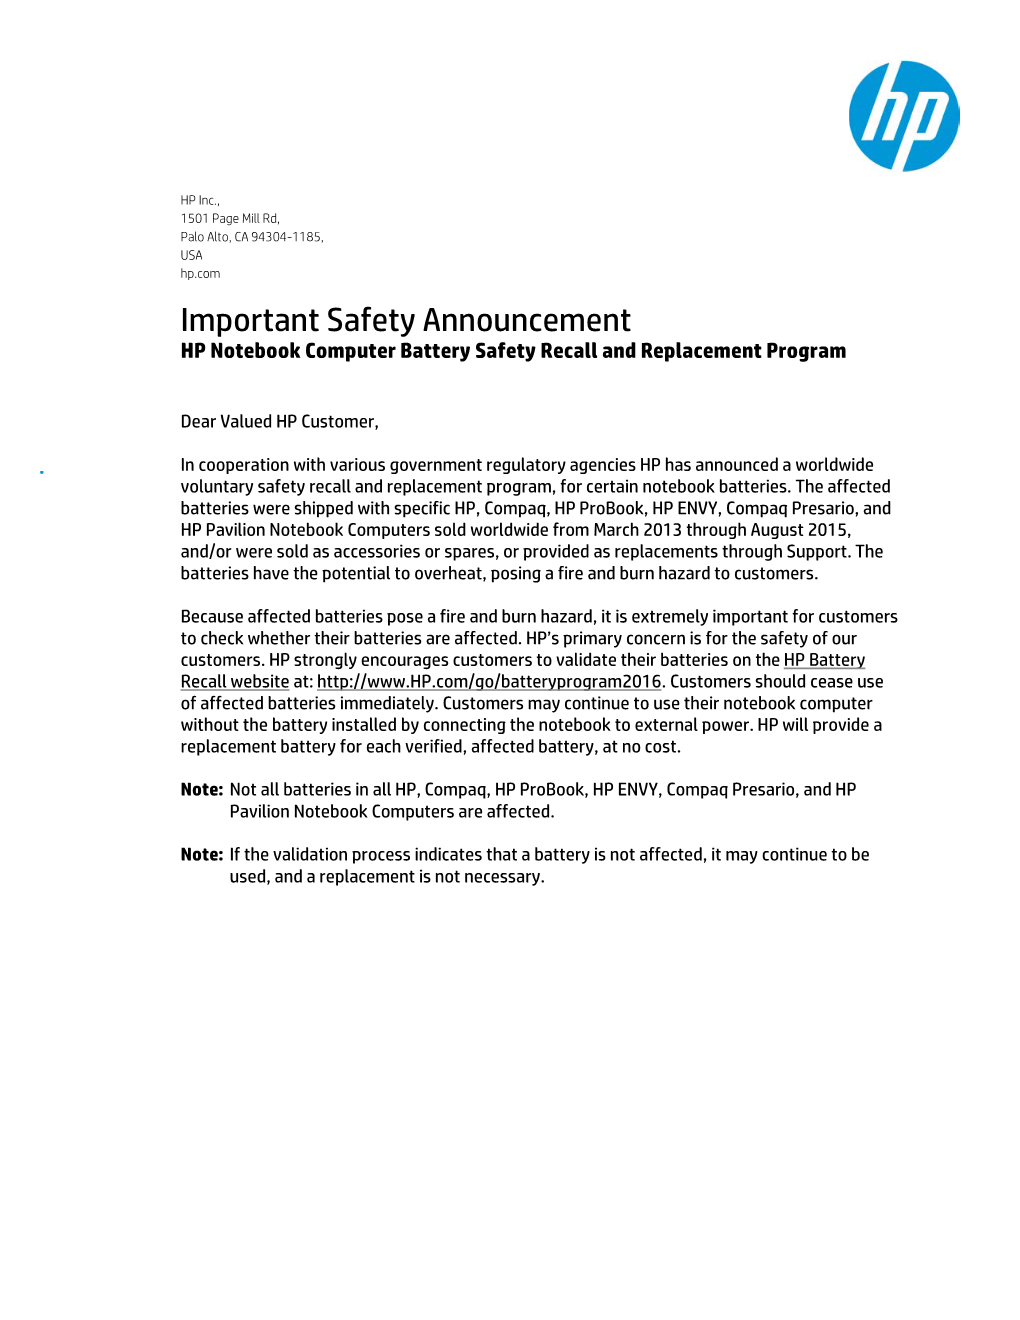 HP Notebook Battery Safety Recall and Replacement Program Please Contact HP Via Contact Us on HP Battery Recall Website At